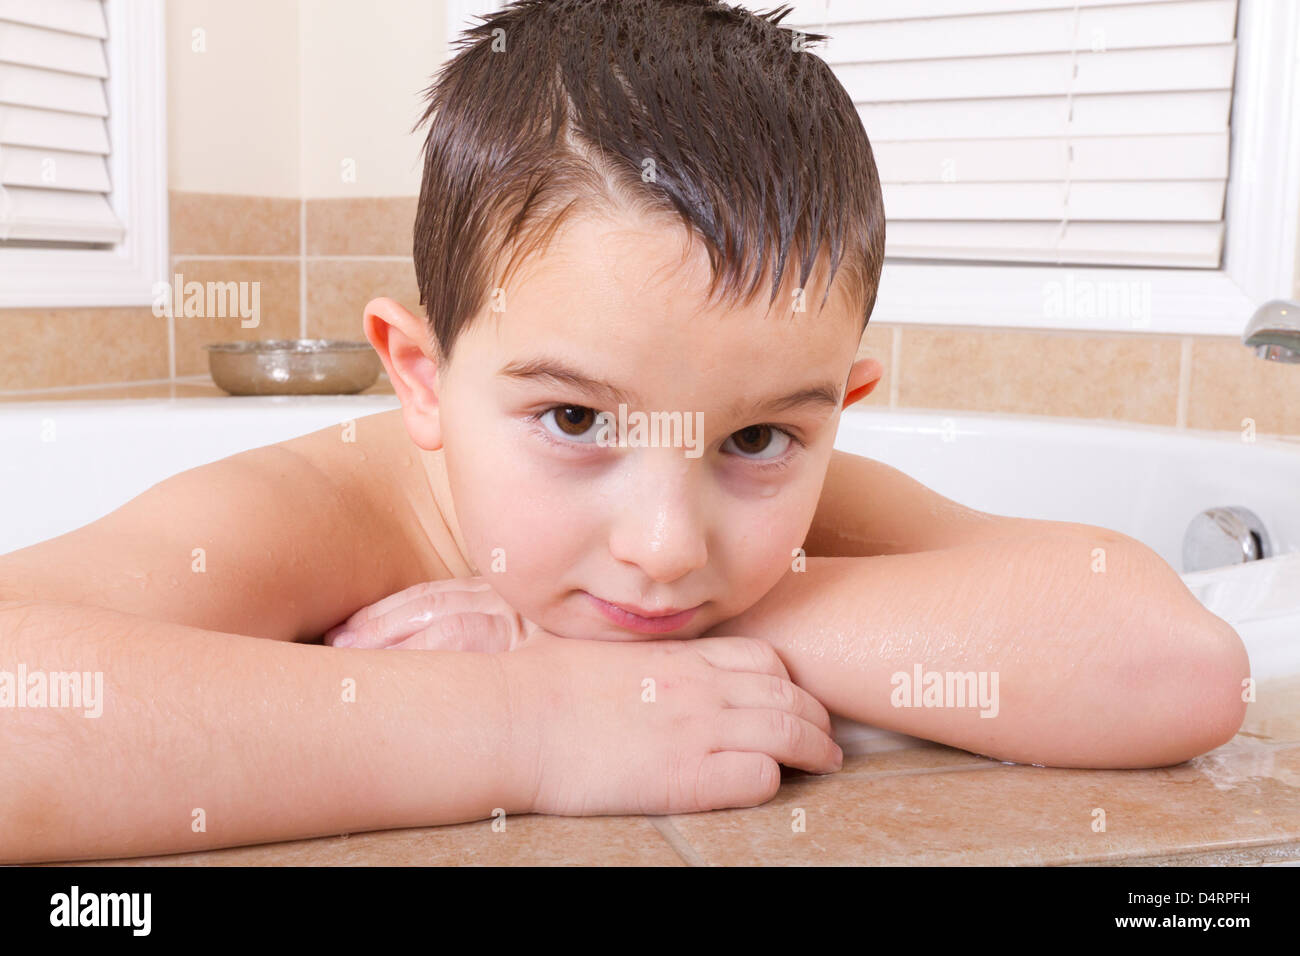 Seven years old kid looking at you ruminatively from a bath tub. Stock Photo